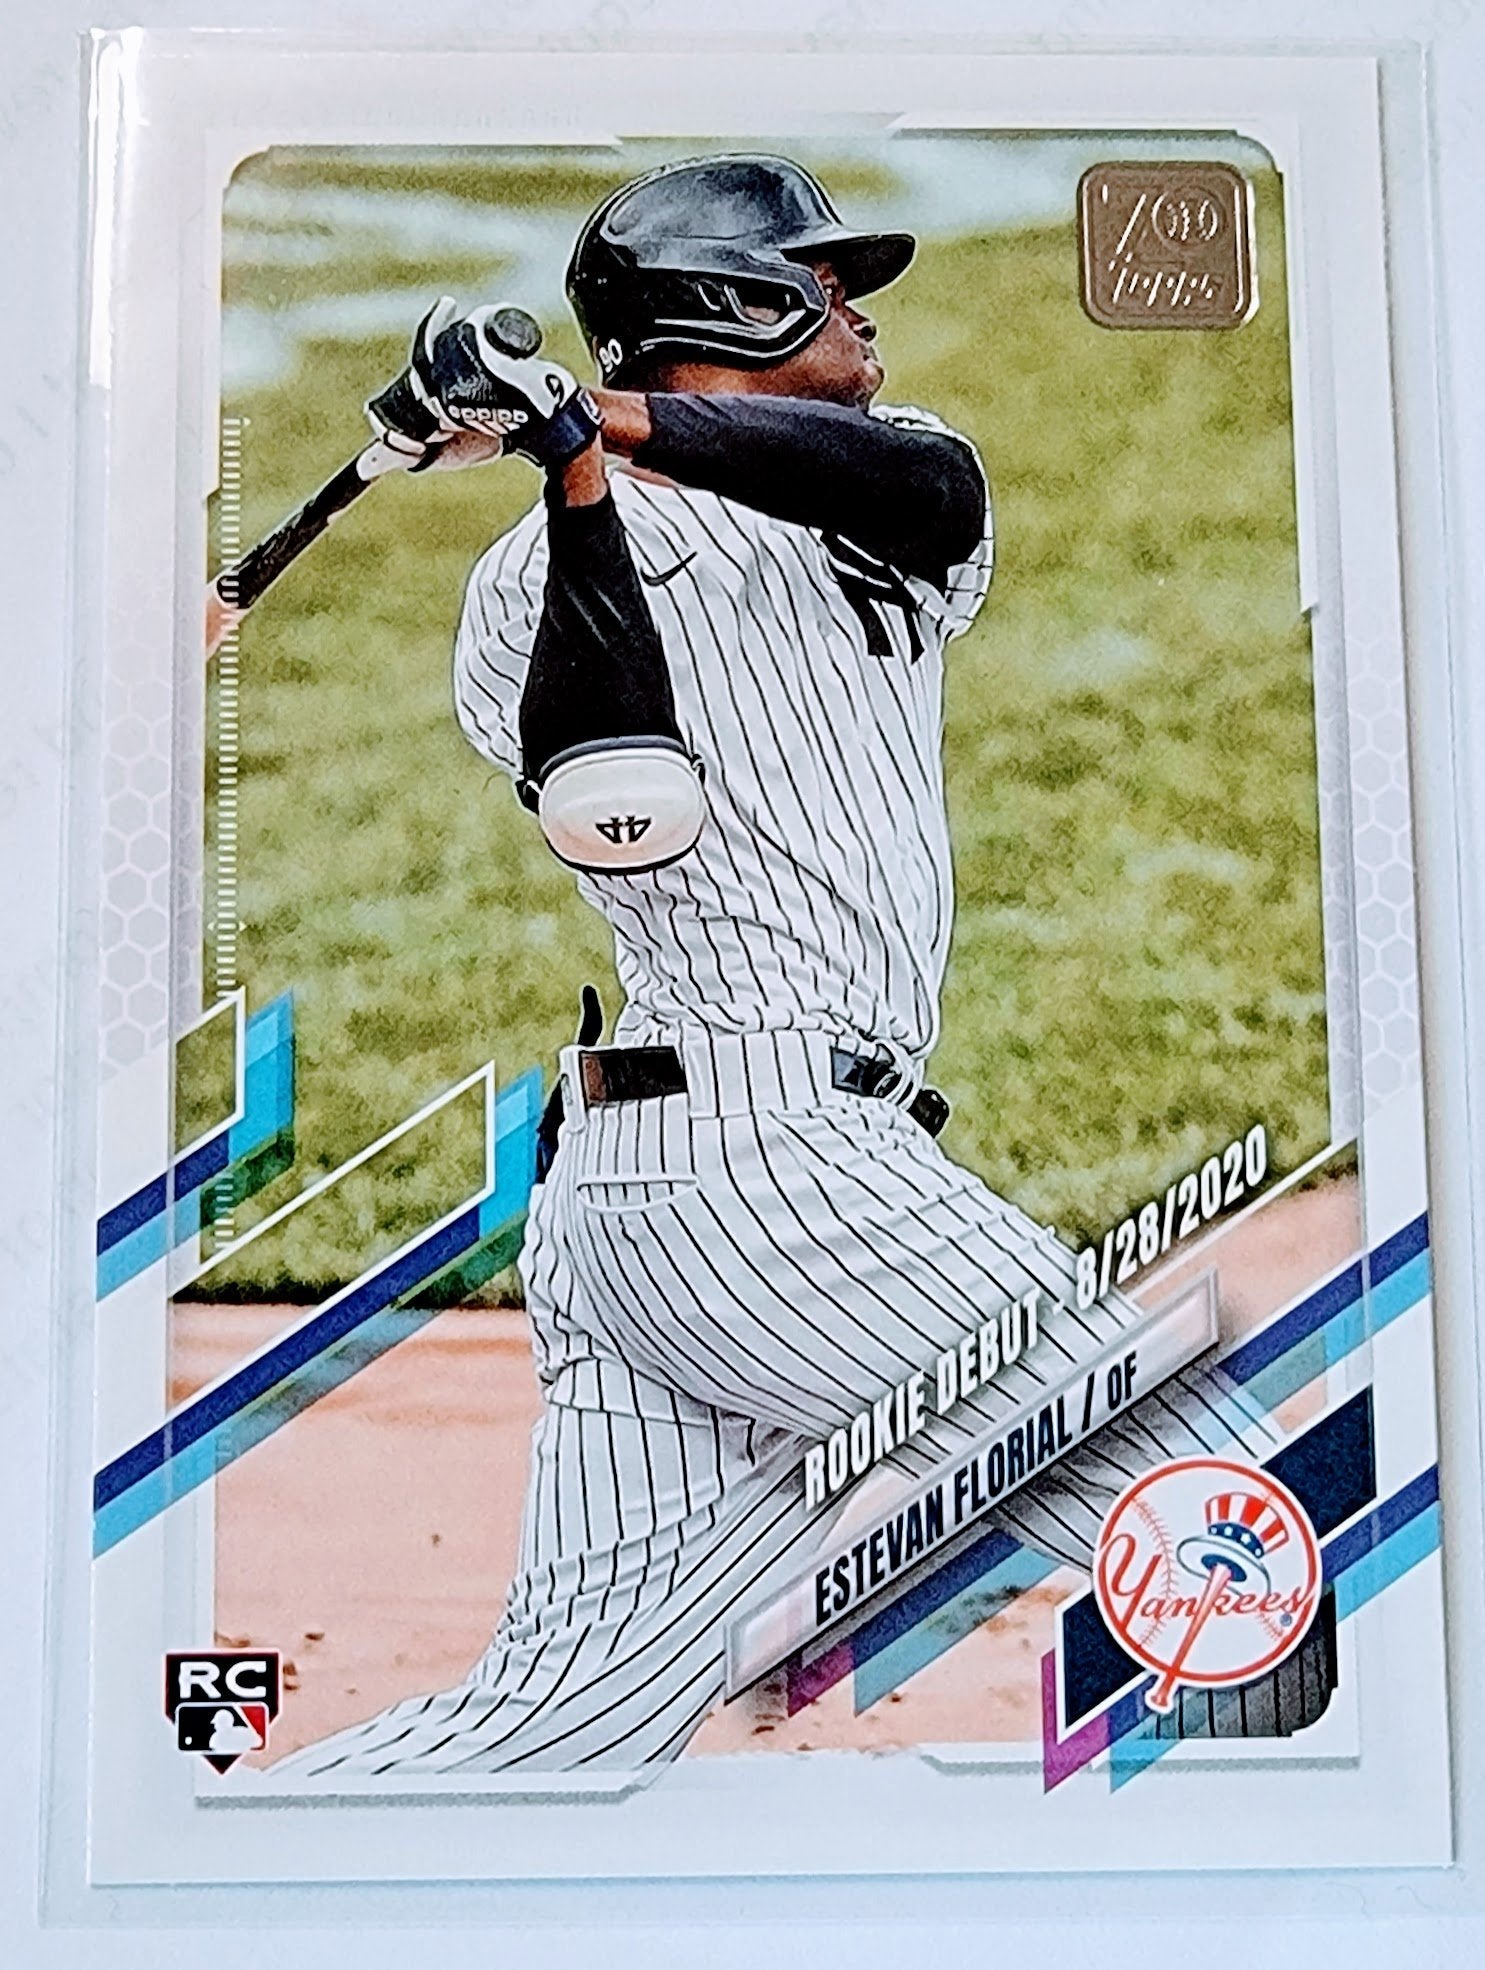 2021 Topps Update Estevan Florial Rookie Debut Baseball Trading Card SMCB1 simple Xclusive Collectibles   